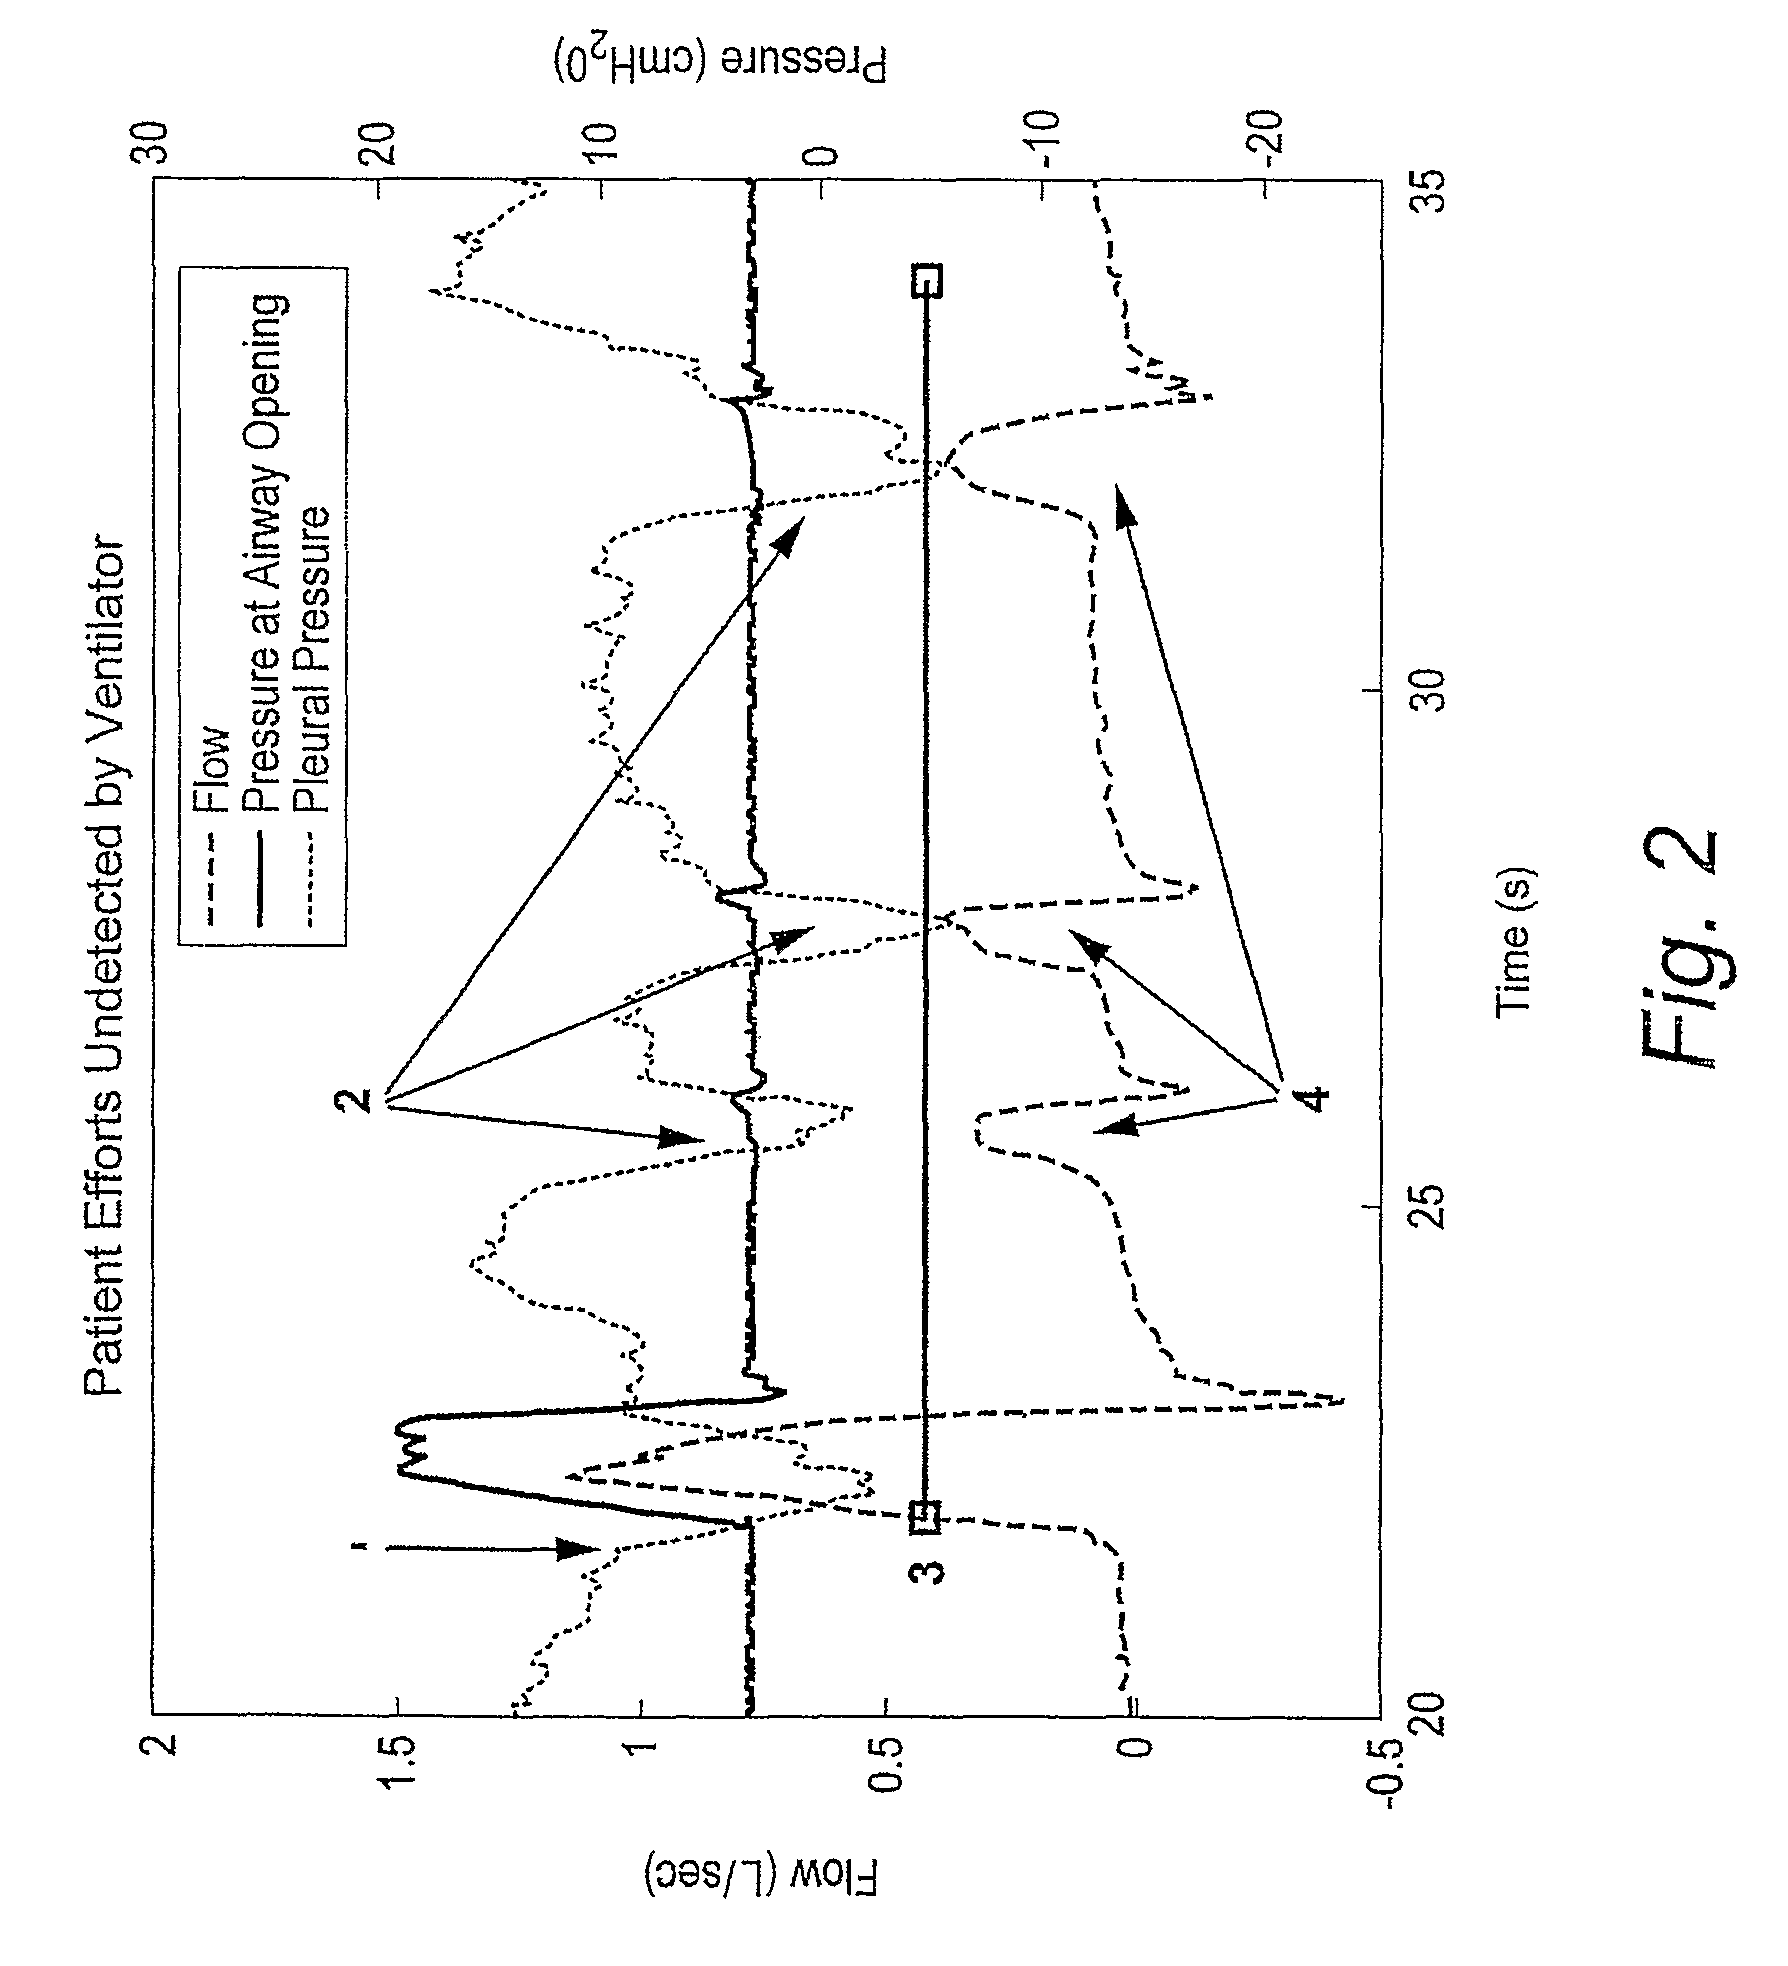 Method and apparatus for detecting ineffective inspiratory efforts and improving patient-ventilator interaction